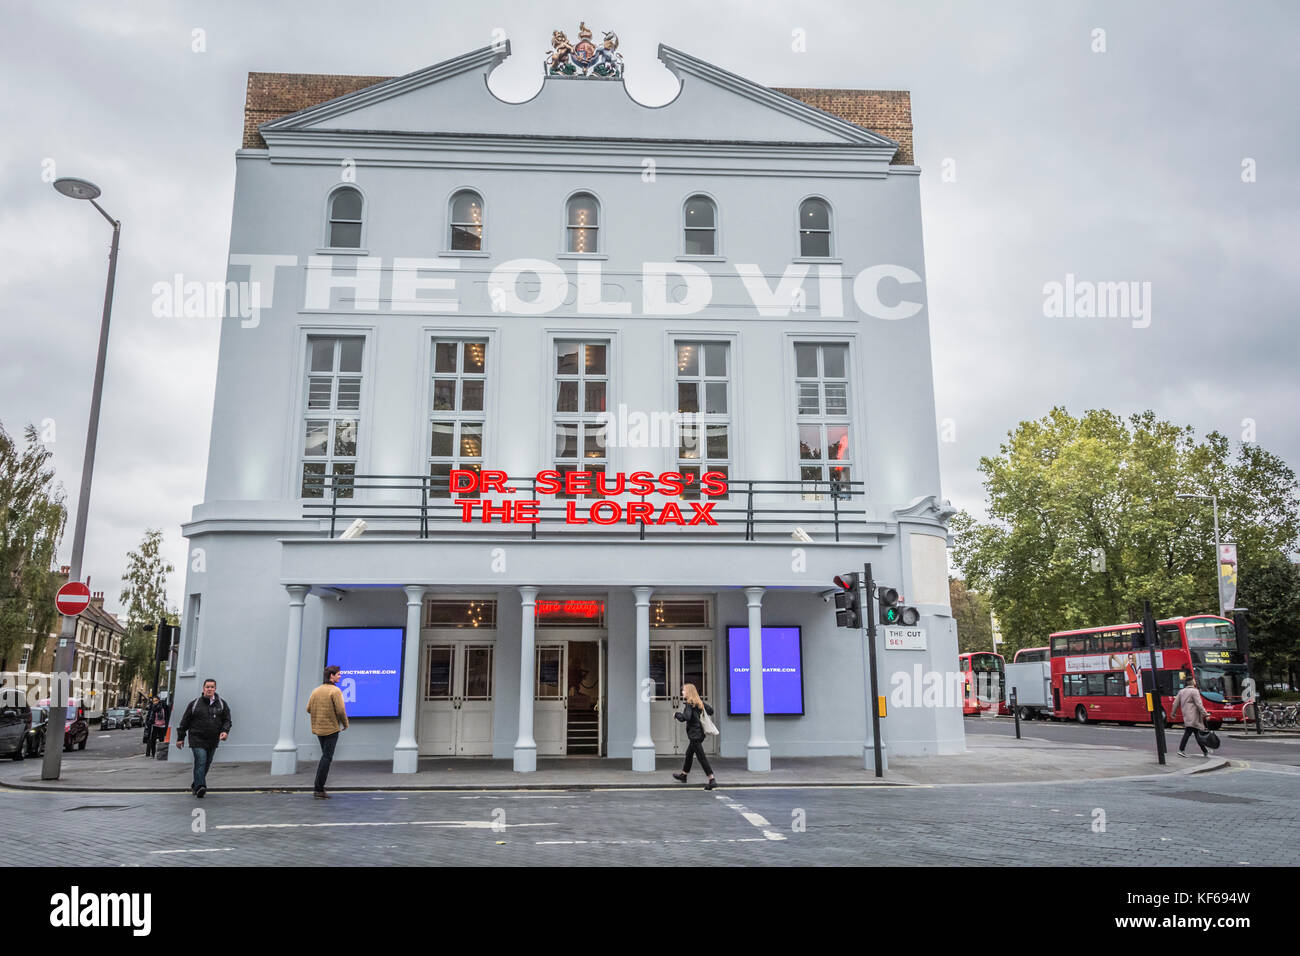 The Opening Night of Dr. Seuss's The Lorax at the Old Vic Theatre on The Cut in London, SE1, UK Stock Photo